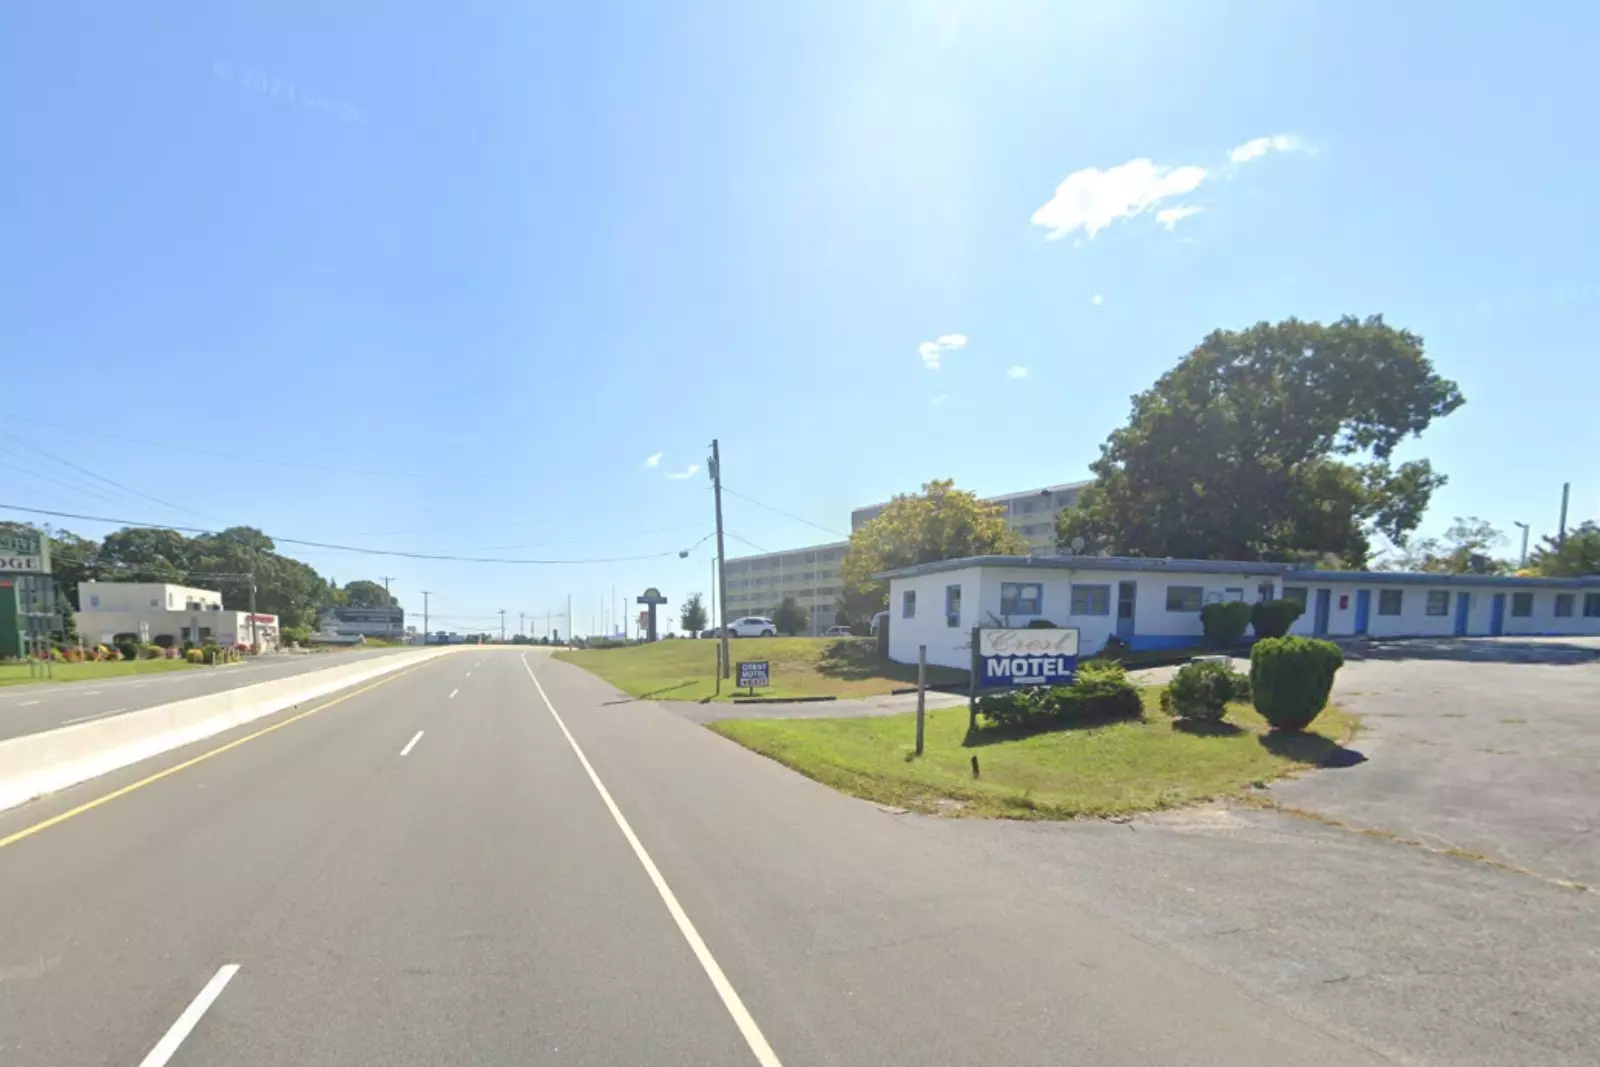 Eastbound Absecon Blvd at the Crest Motel in Absecon NJ - Photo: Google Maps